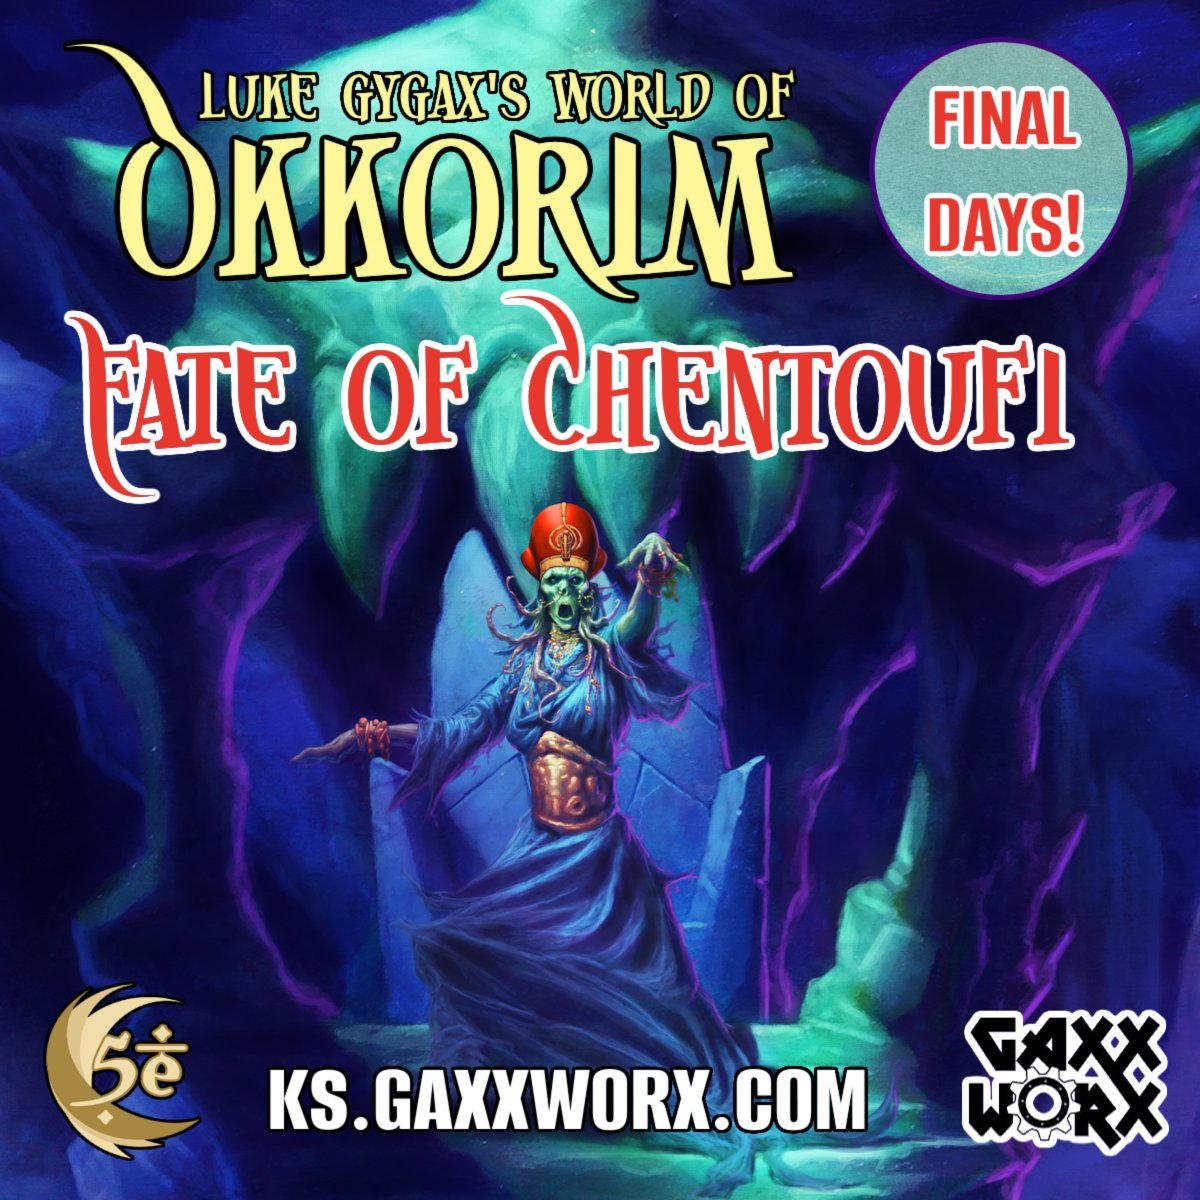 Pelicos crossed you by stealing the Eye of Chentoufi and leaving you deal with the enraged Cultists. Now the leaders of the city expect you to fix this disaster. The Fate of Chentoufi rests in your hands! All 3 scenarios $29! ks.gaxxworx.com #dnd #ttrpg #okkorim #gygax